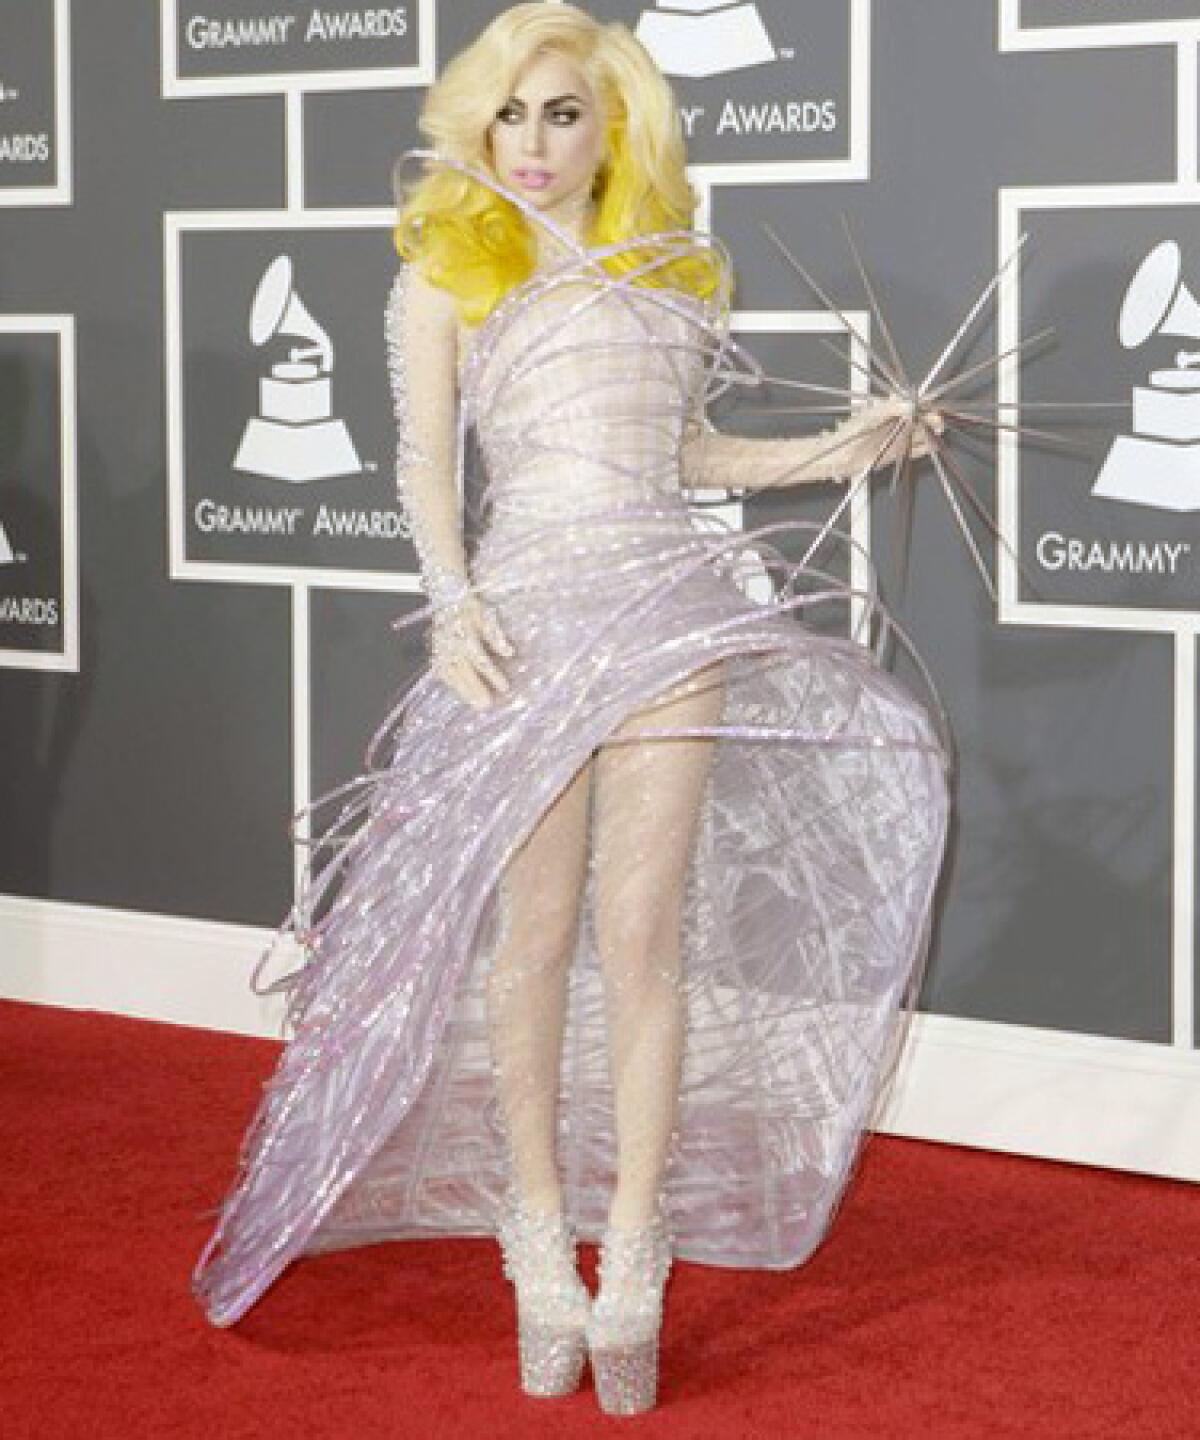 Lady Gaga is in orbit in a Giorgio Armani Privé dress and crystal-encrusted stockings and platforms.